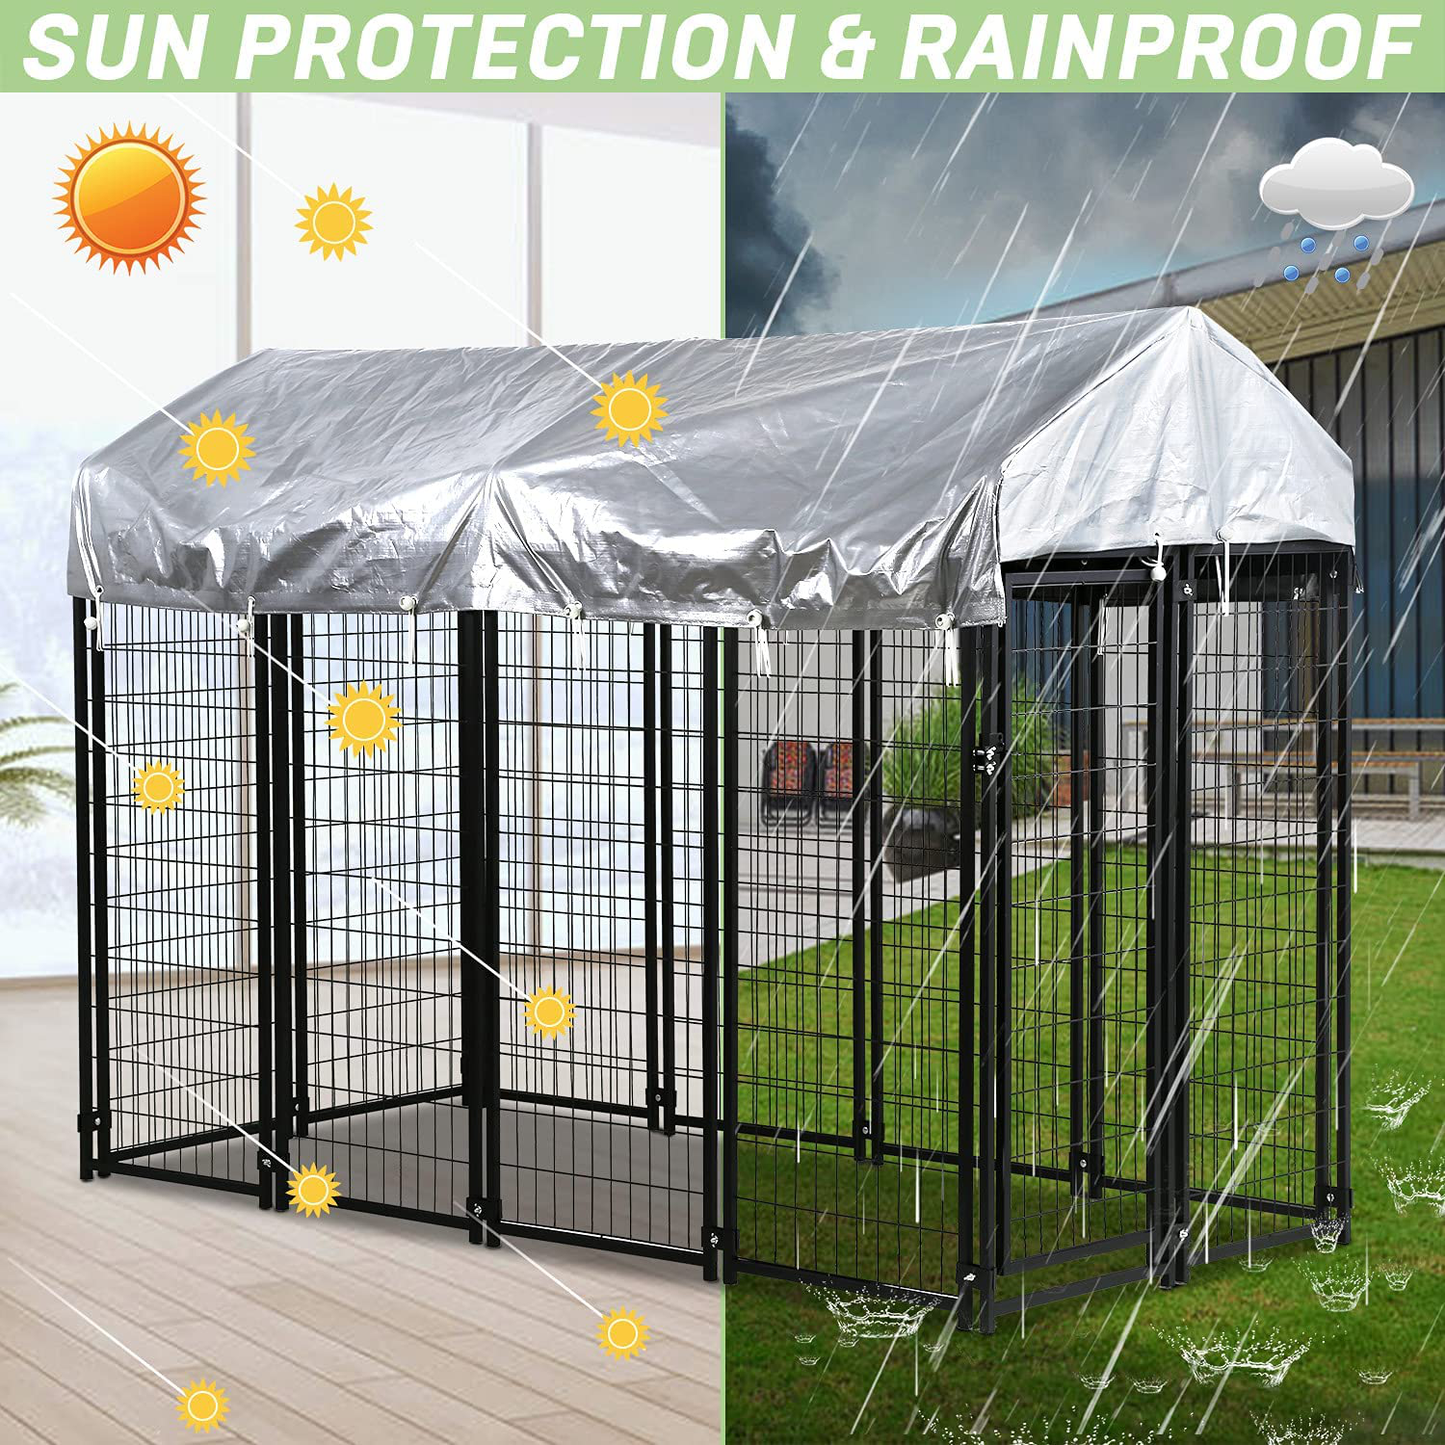 Heavy Duty Dog Crate Cage Kennel,Large Outdoor Dog Yard Kennel Pet Playpen House,Wire Metal Pet Cage Fence Play Pen Crates W/ UV Protection Waterproof Shade Cover & Roof & Secure Lock